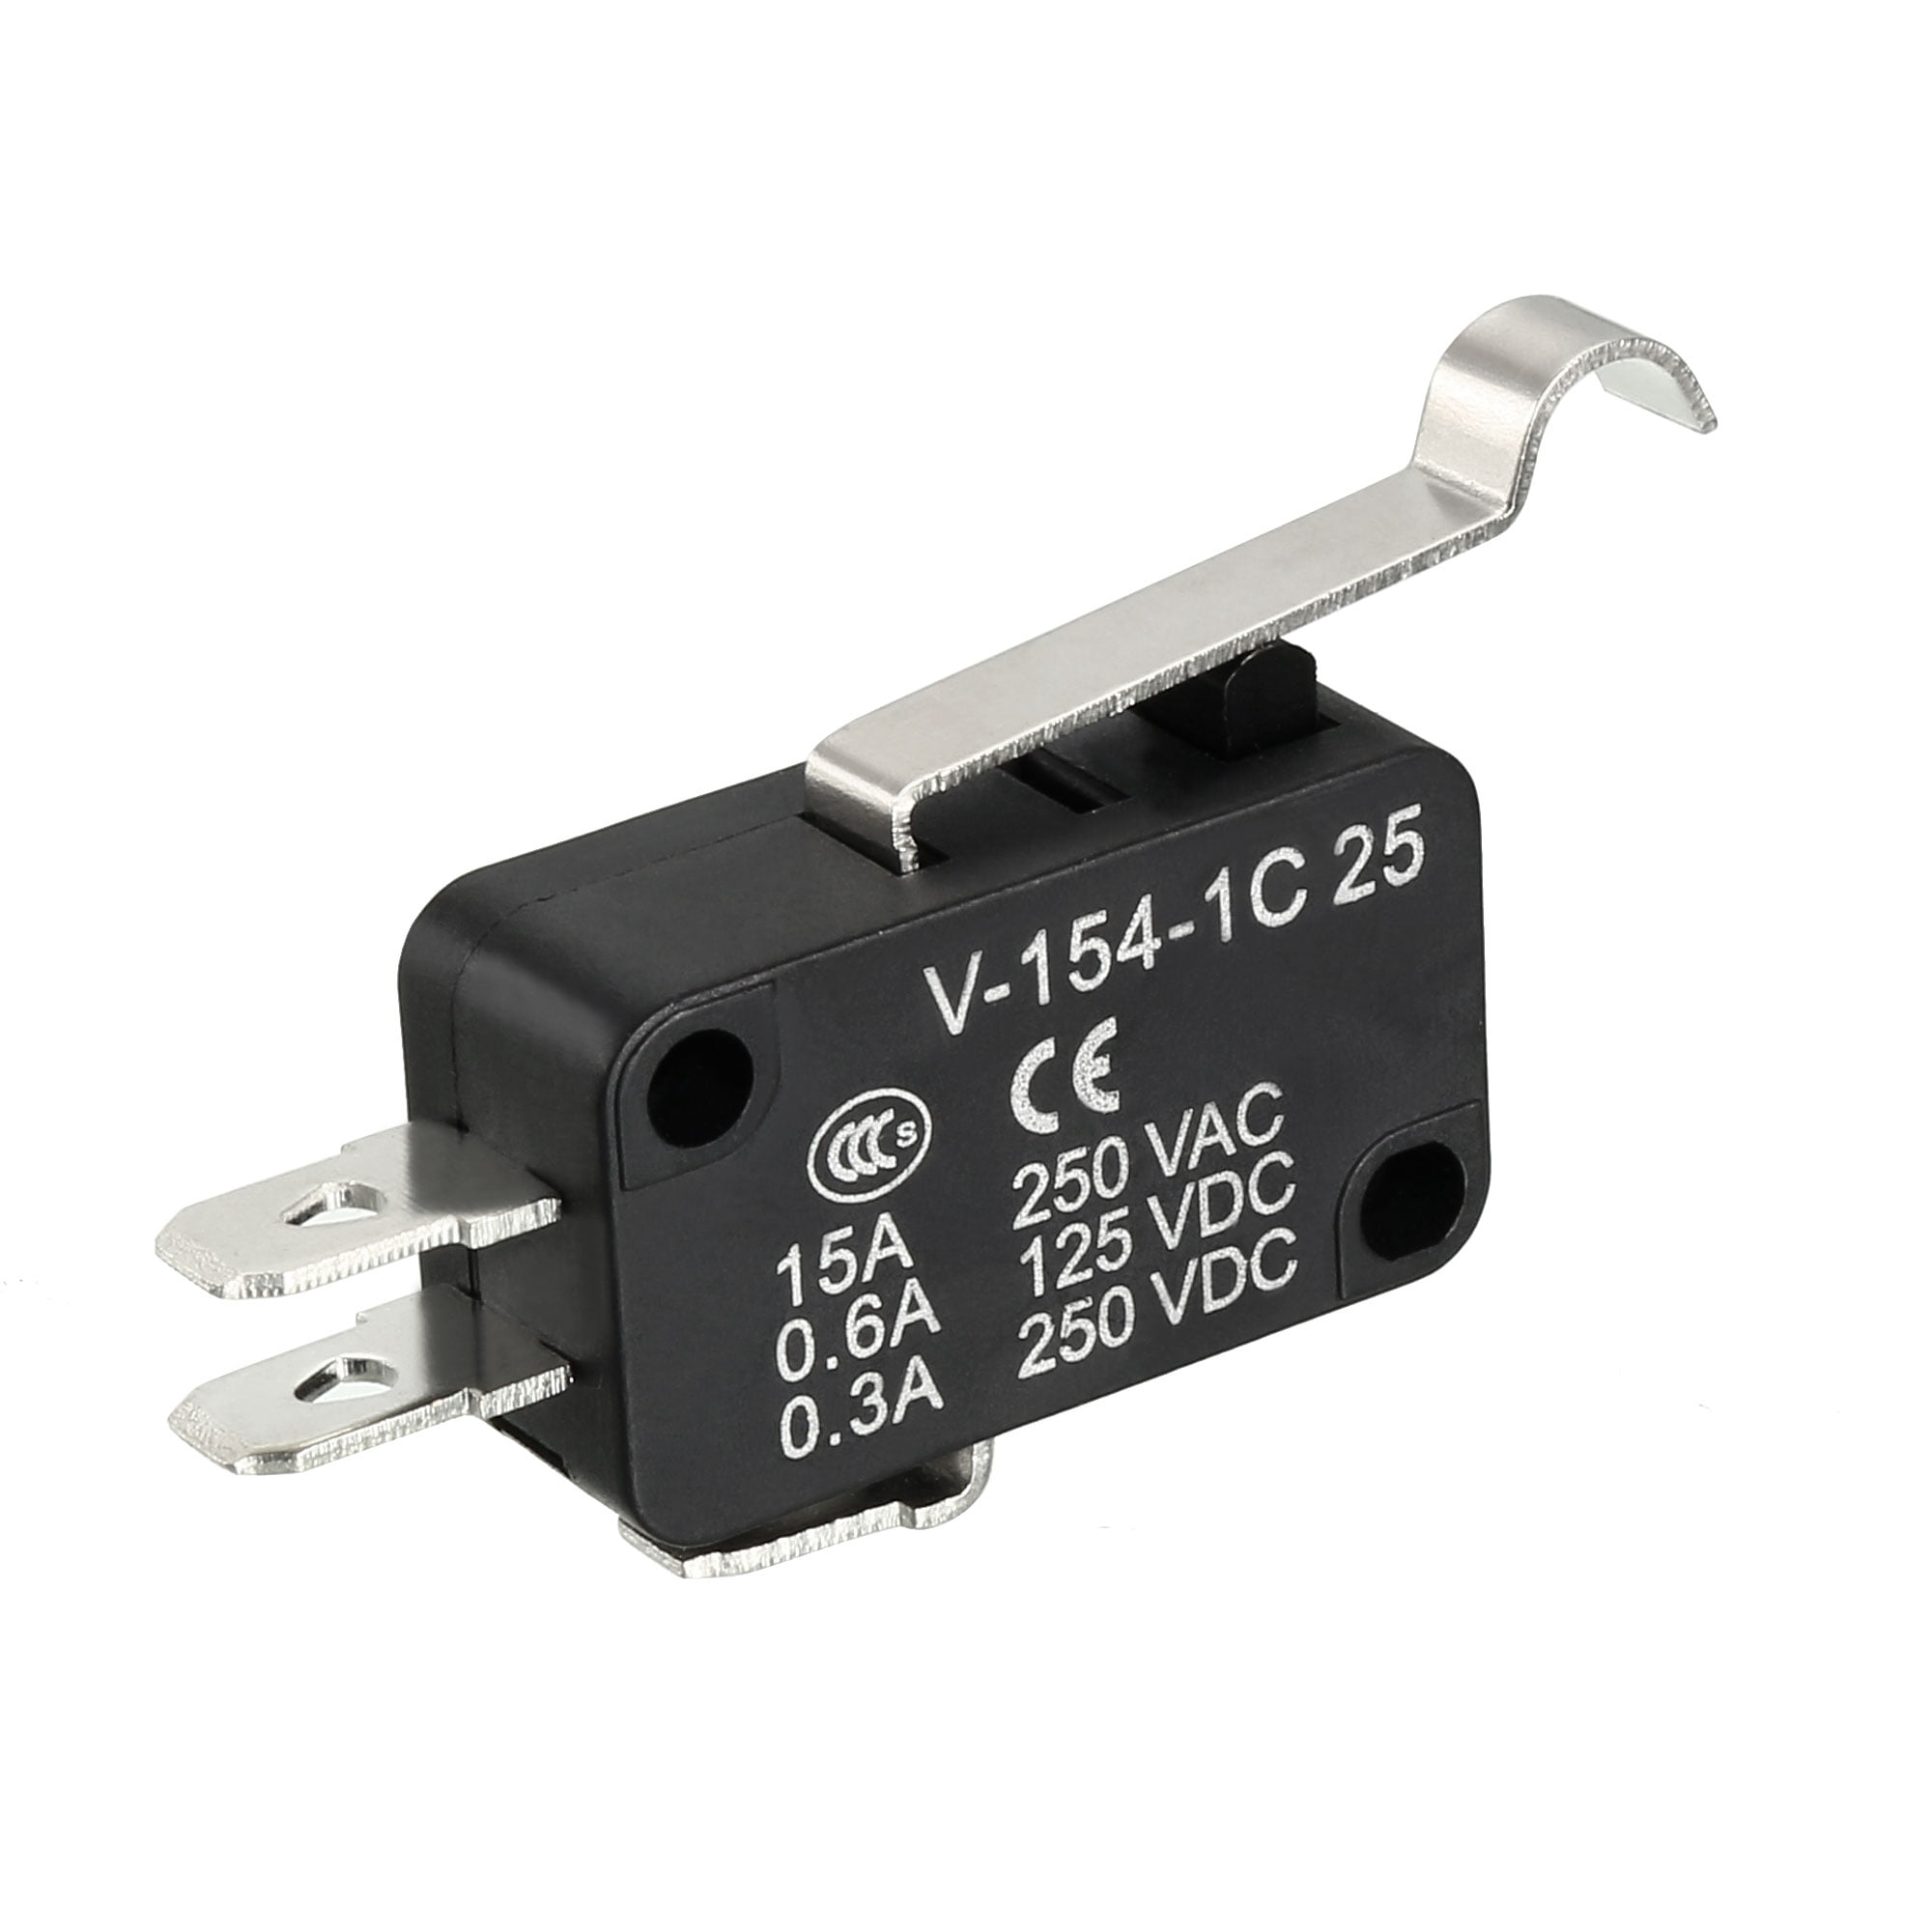 OMRON ELECTRONIC COMPONENTS V-154-1C25 MINIATURE BASIC SWITCH 1 piece